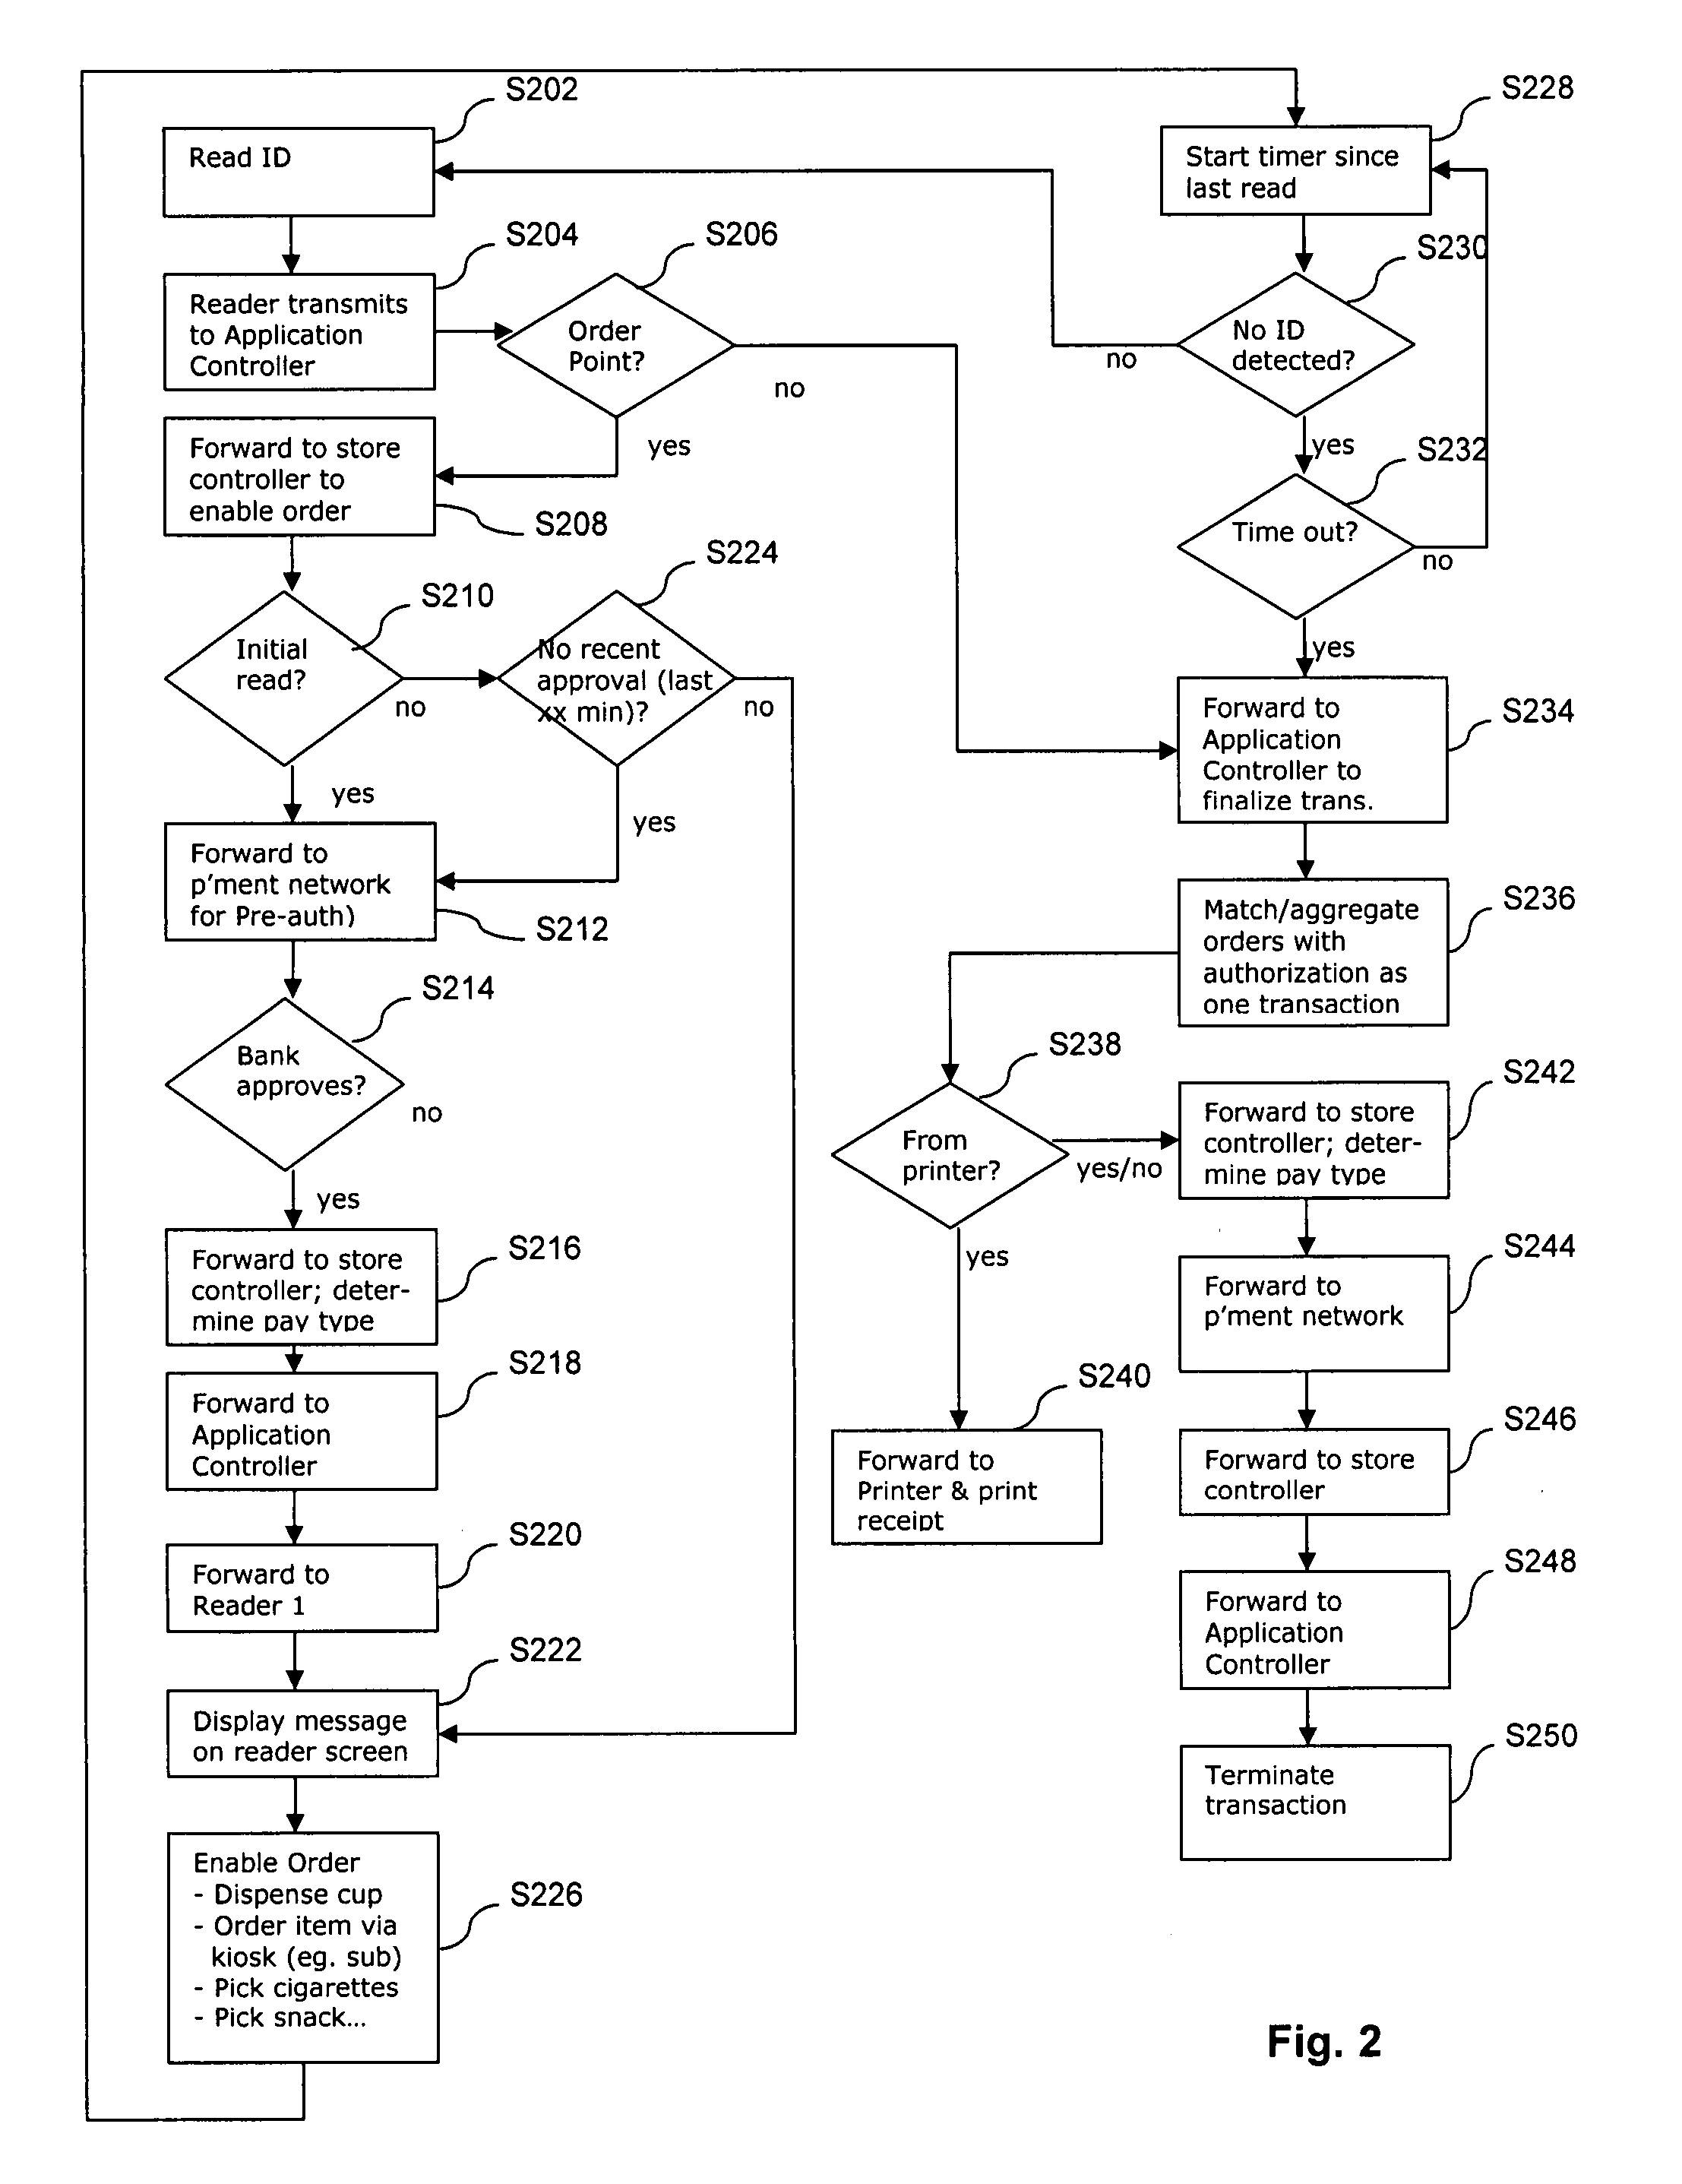 System and/or method for self-serve purchases